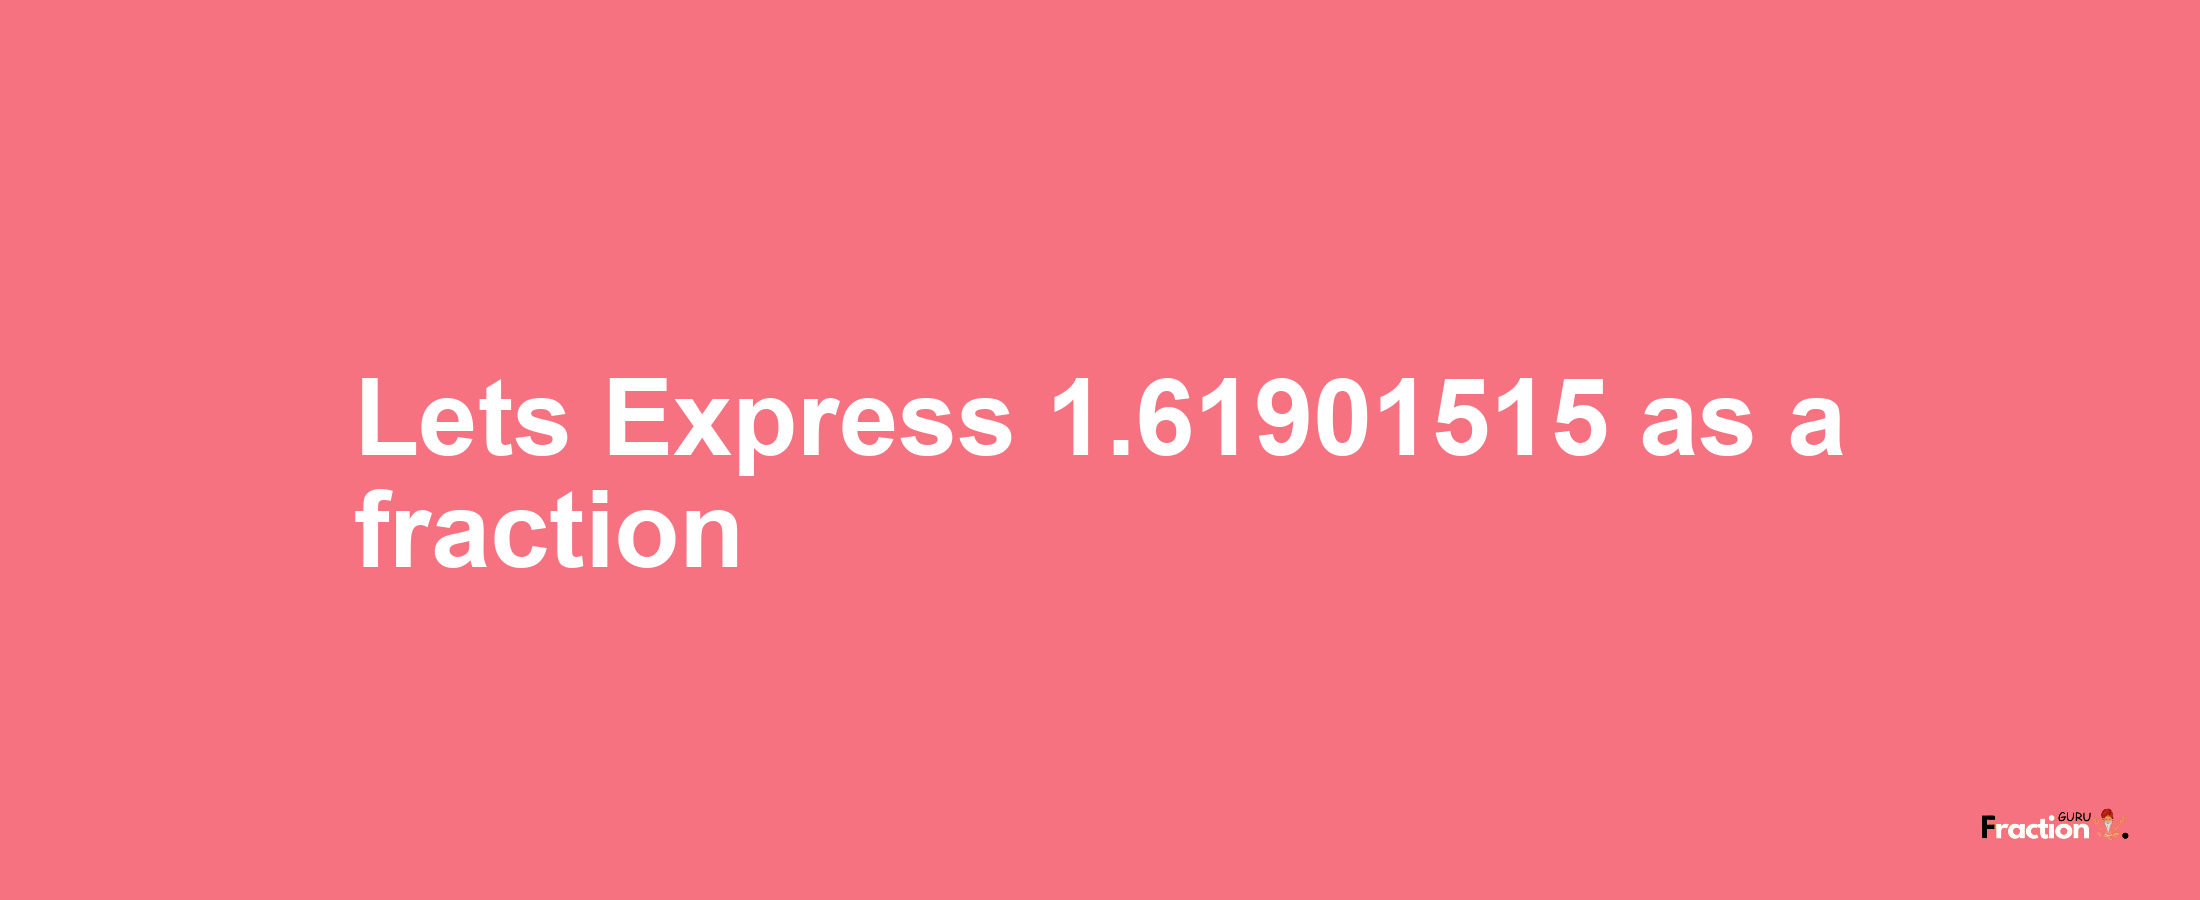 Lets Express 1.61901515 as afraction